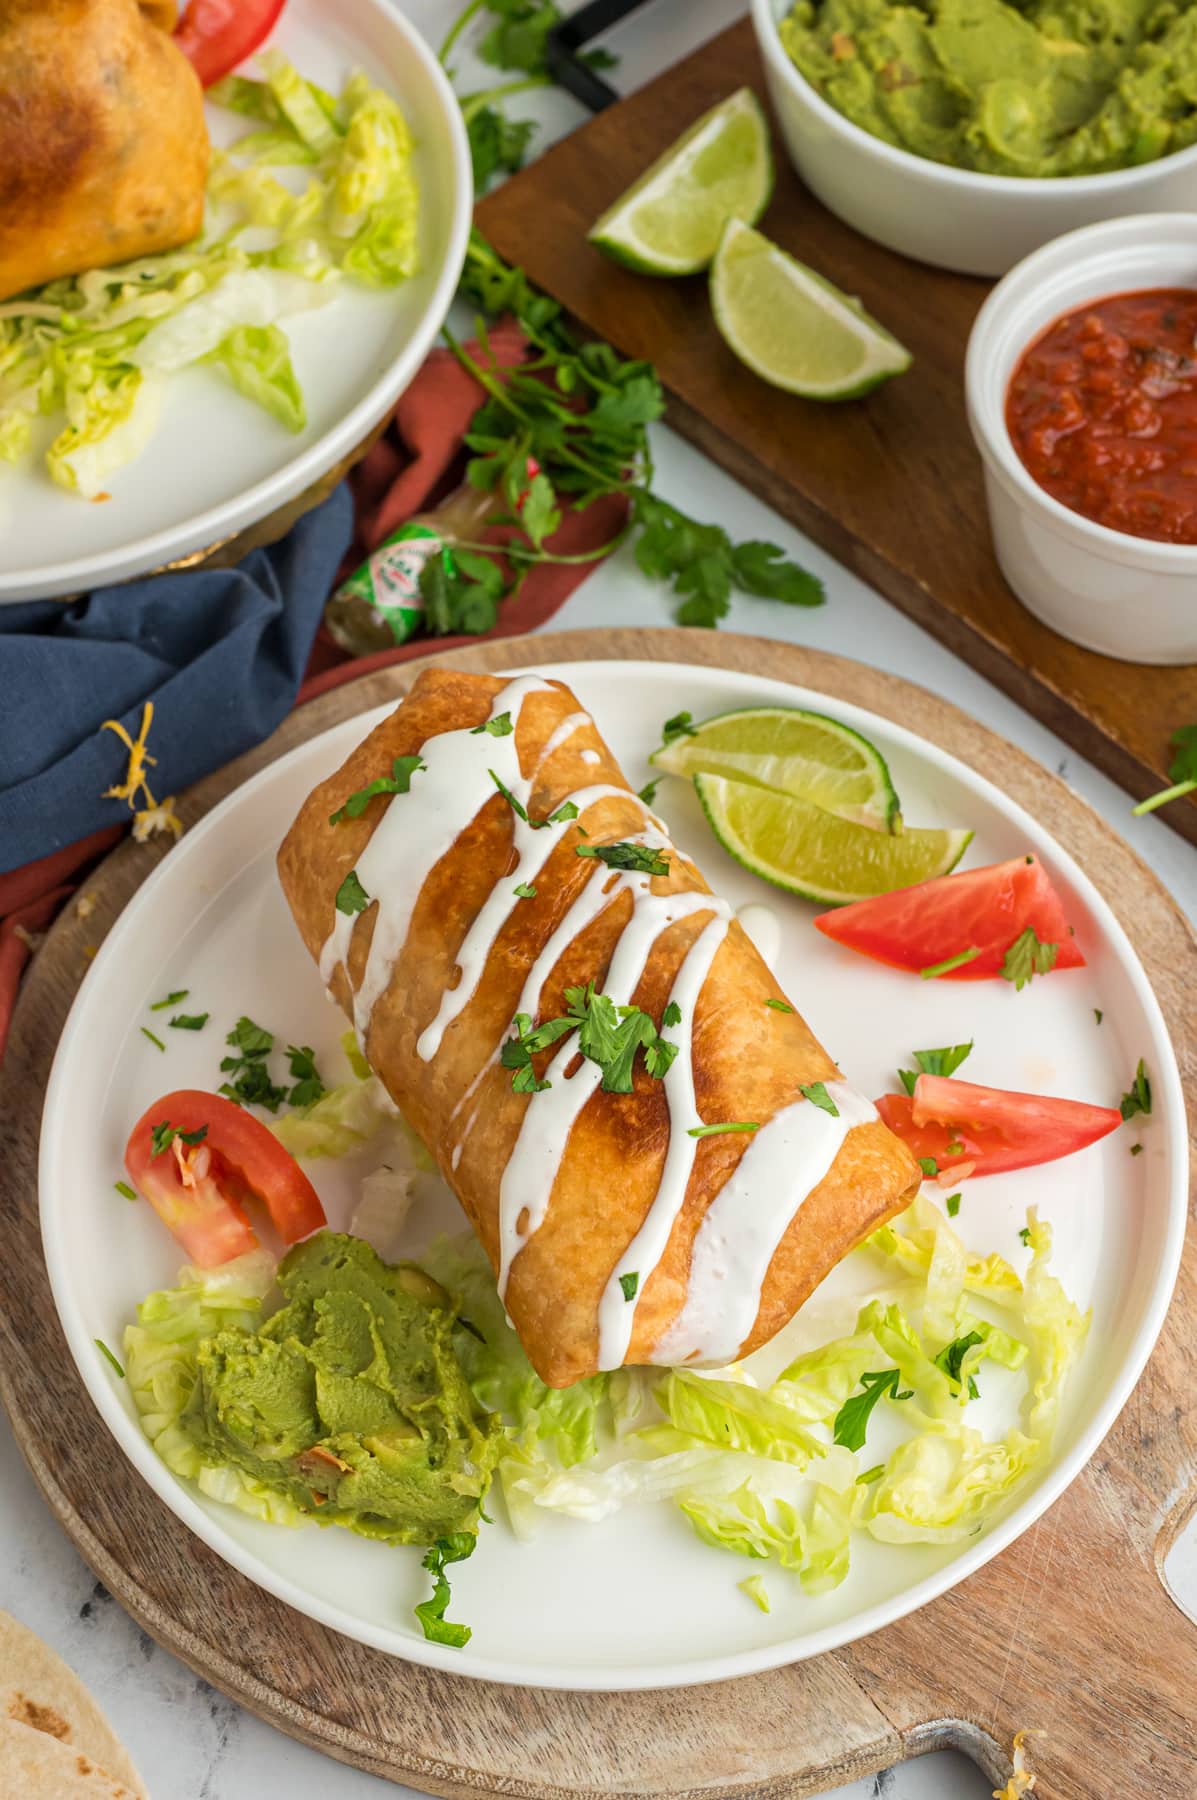 Chicken Chimichanga on plate with limes, lettuce and tomatoes